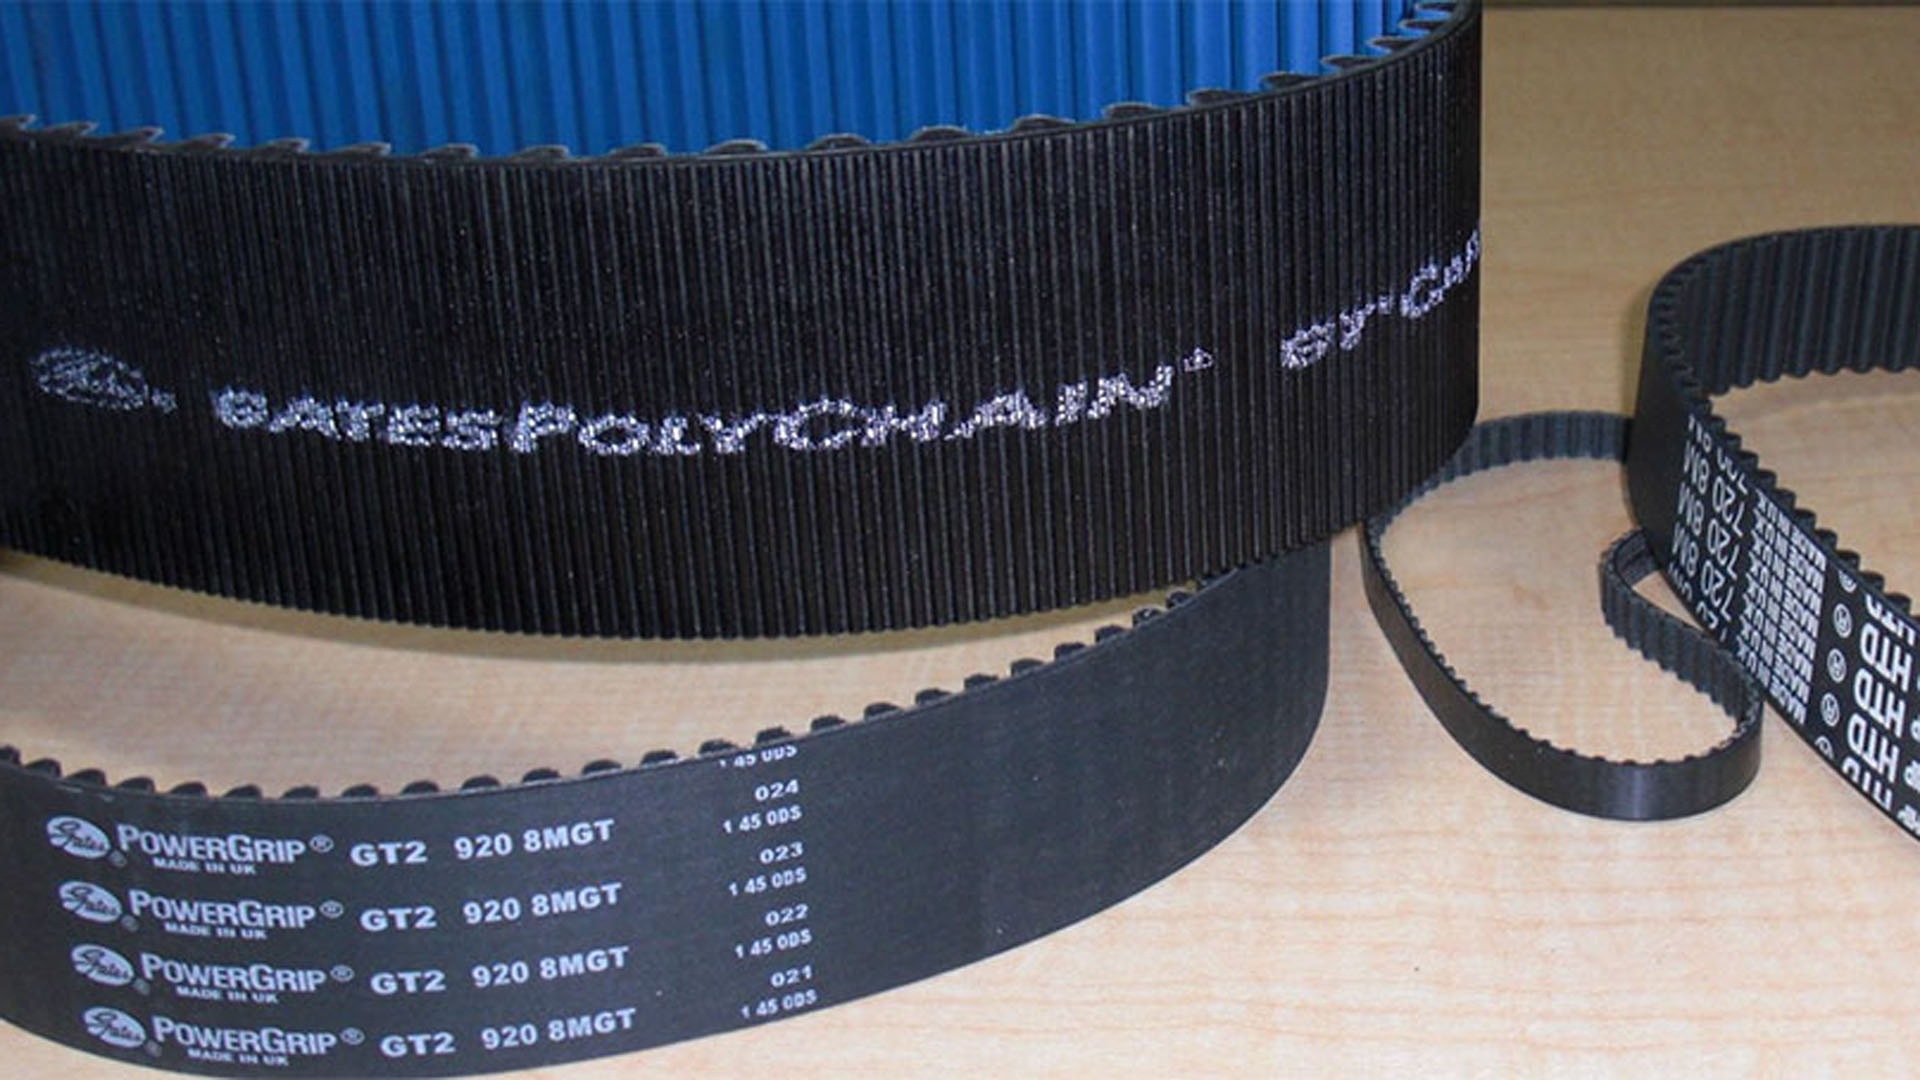 Gates toothed belts, specifically Poly Chain Power Grip GT